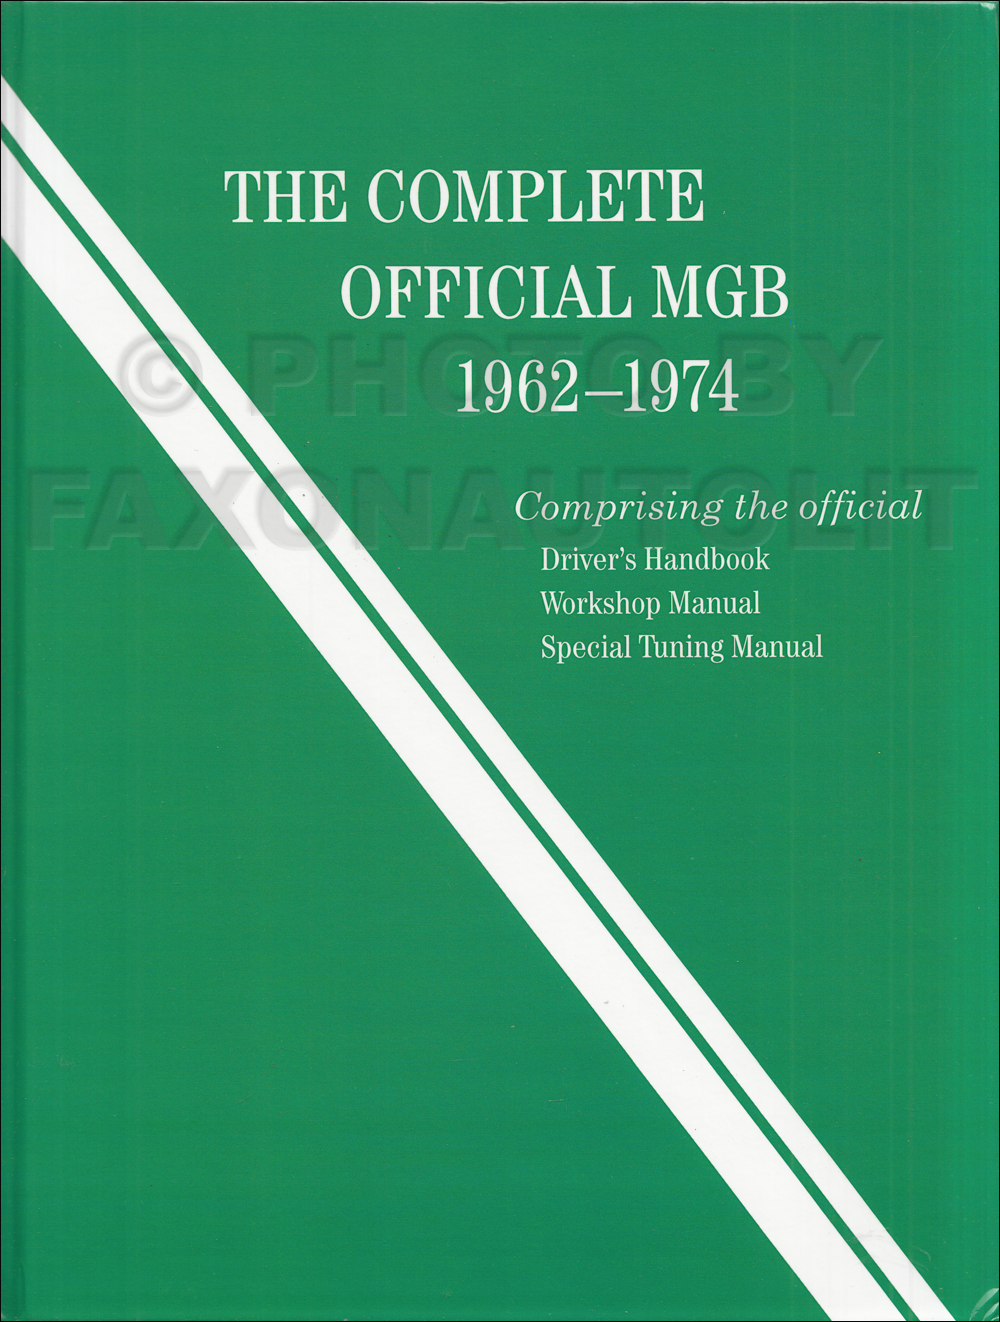 "The Complete Official MGB 1962-1974" Bentley Repair Manual